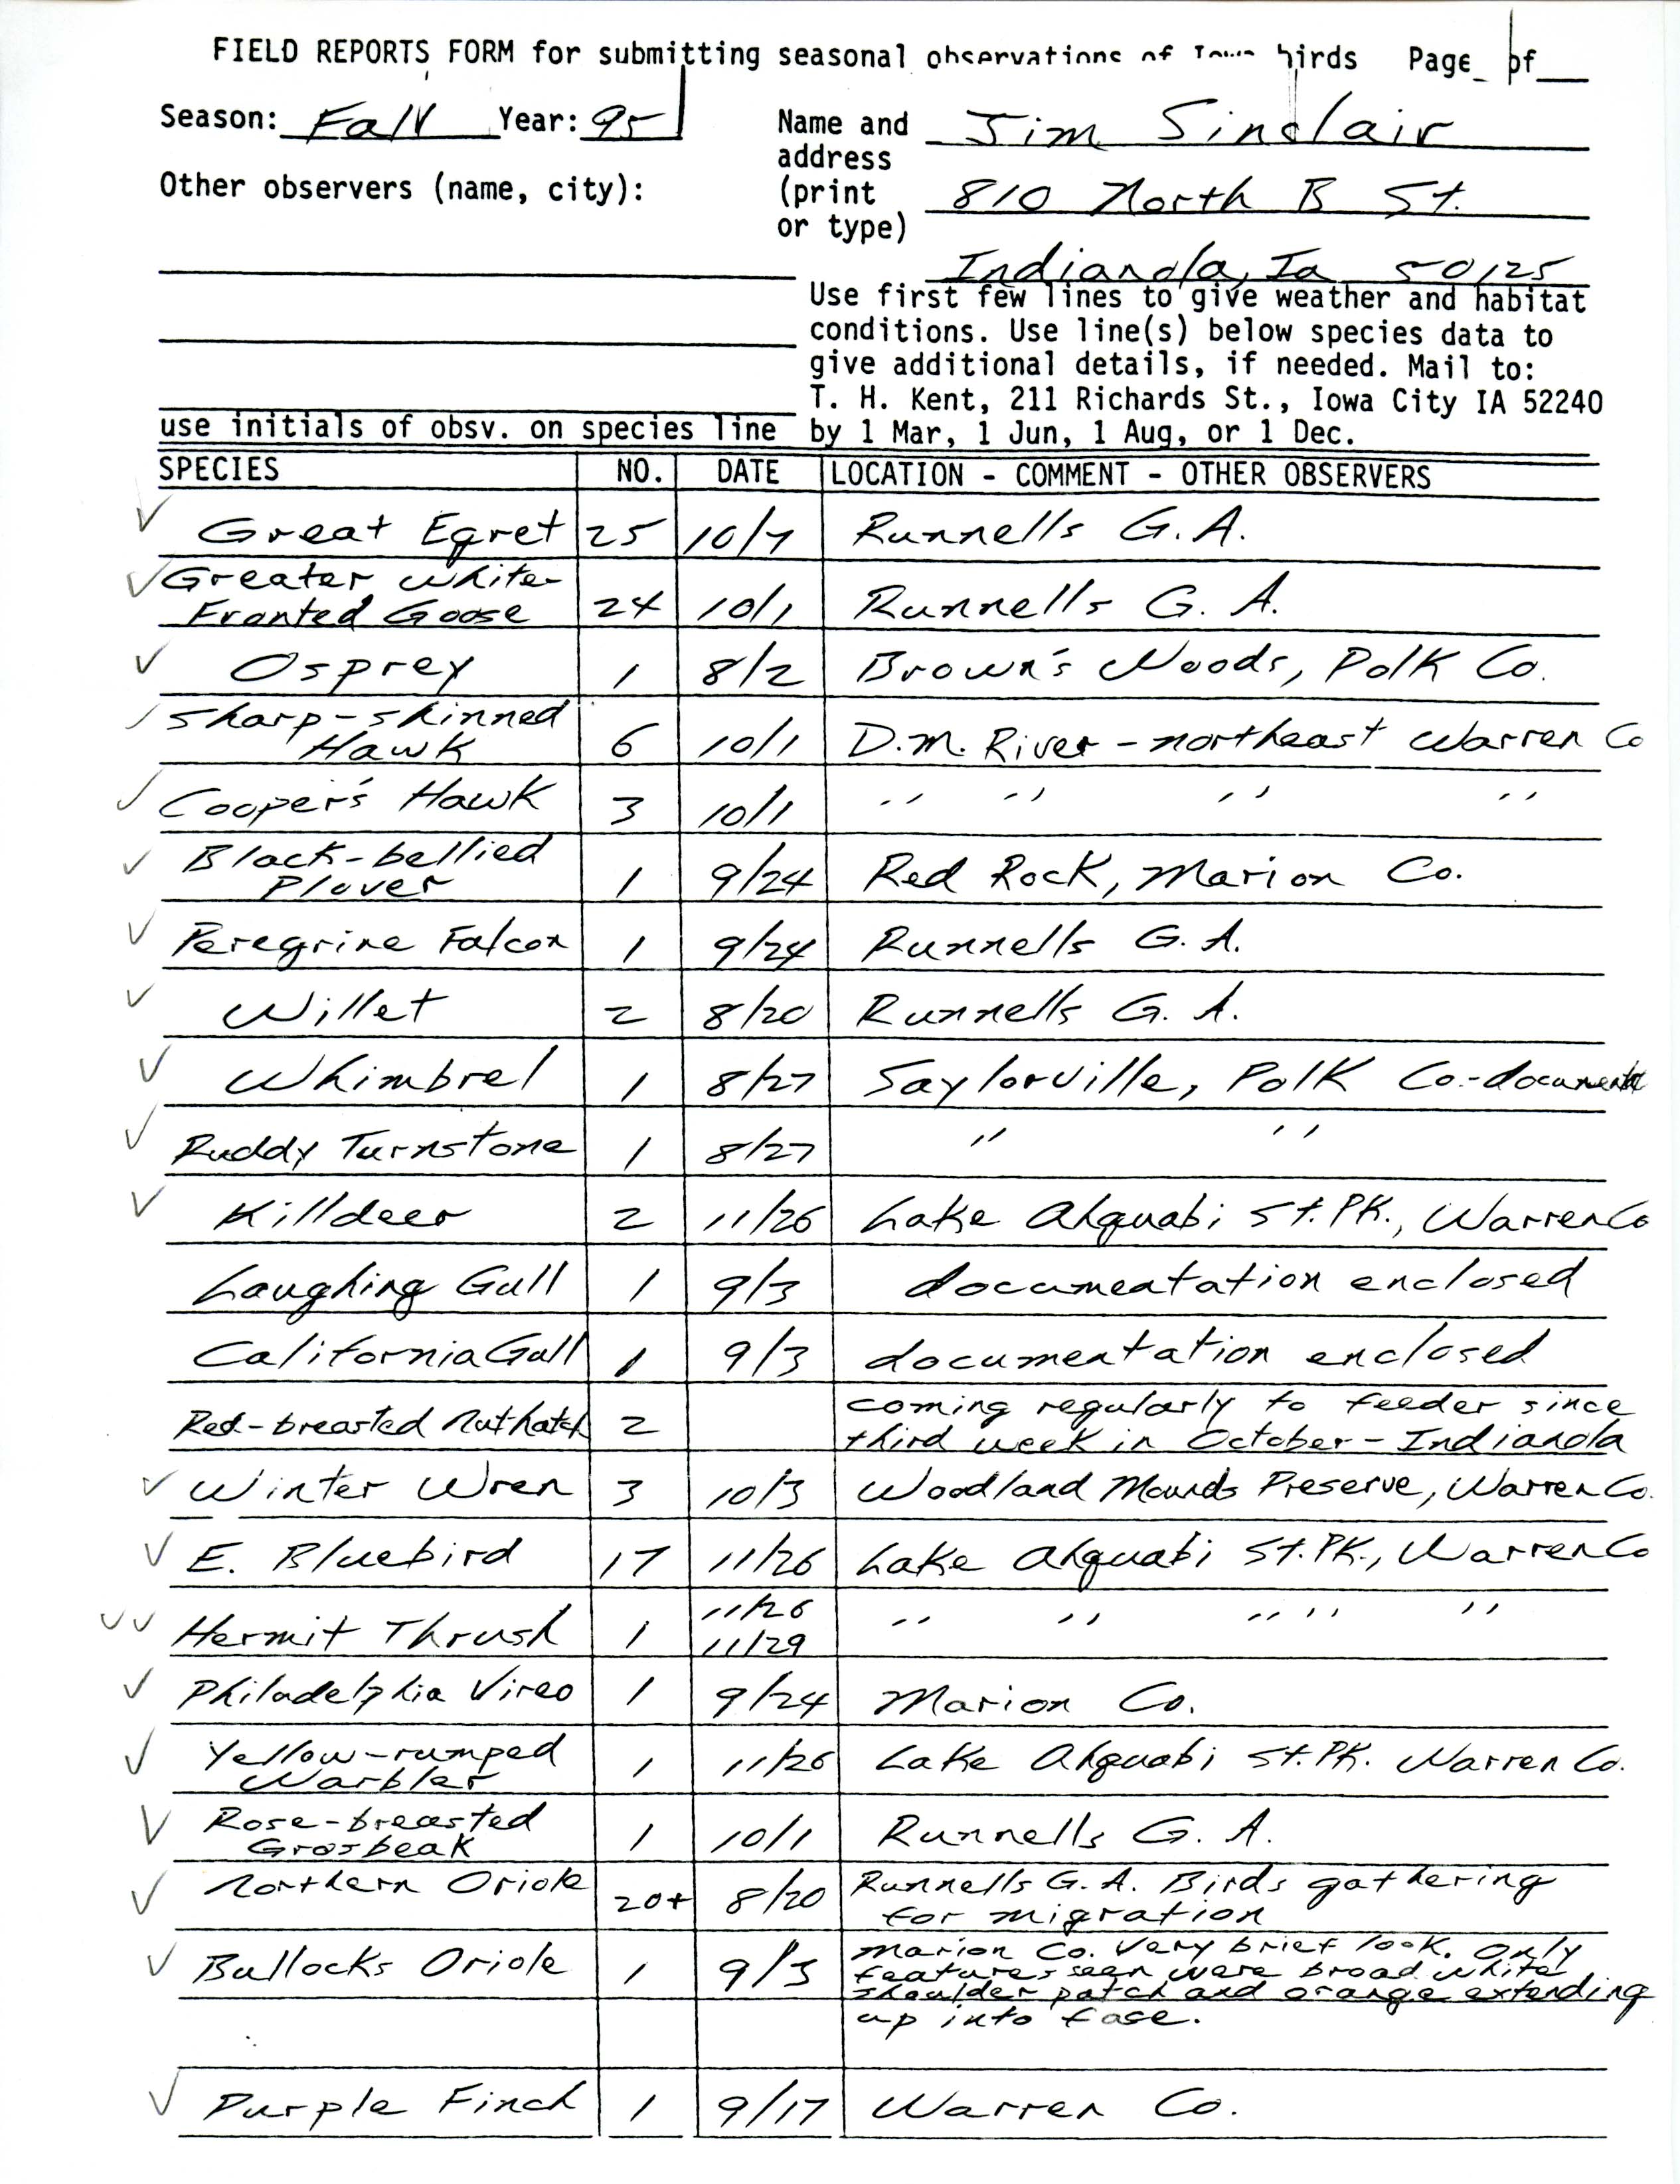 Field reports form for submitting seasonal observations of Iowa birds, Jim Sinclair, fall 1995